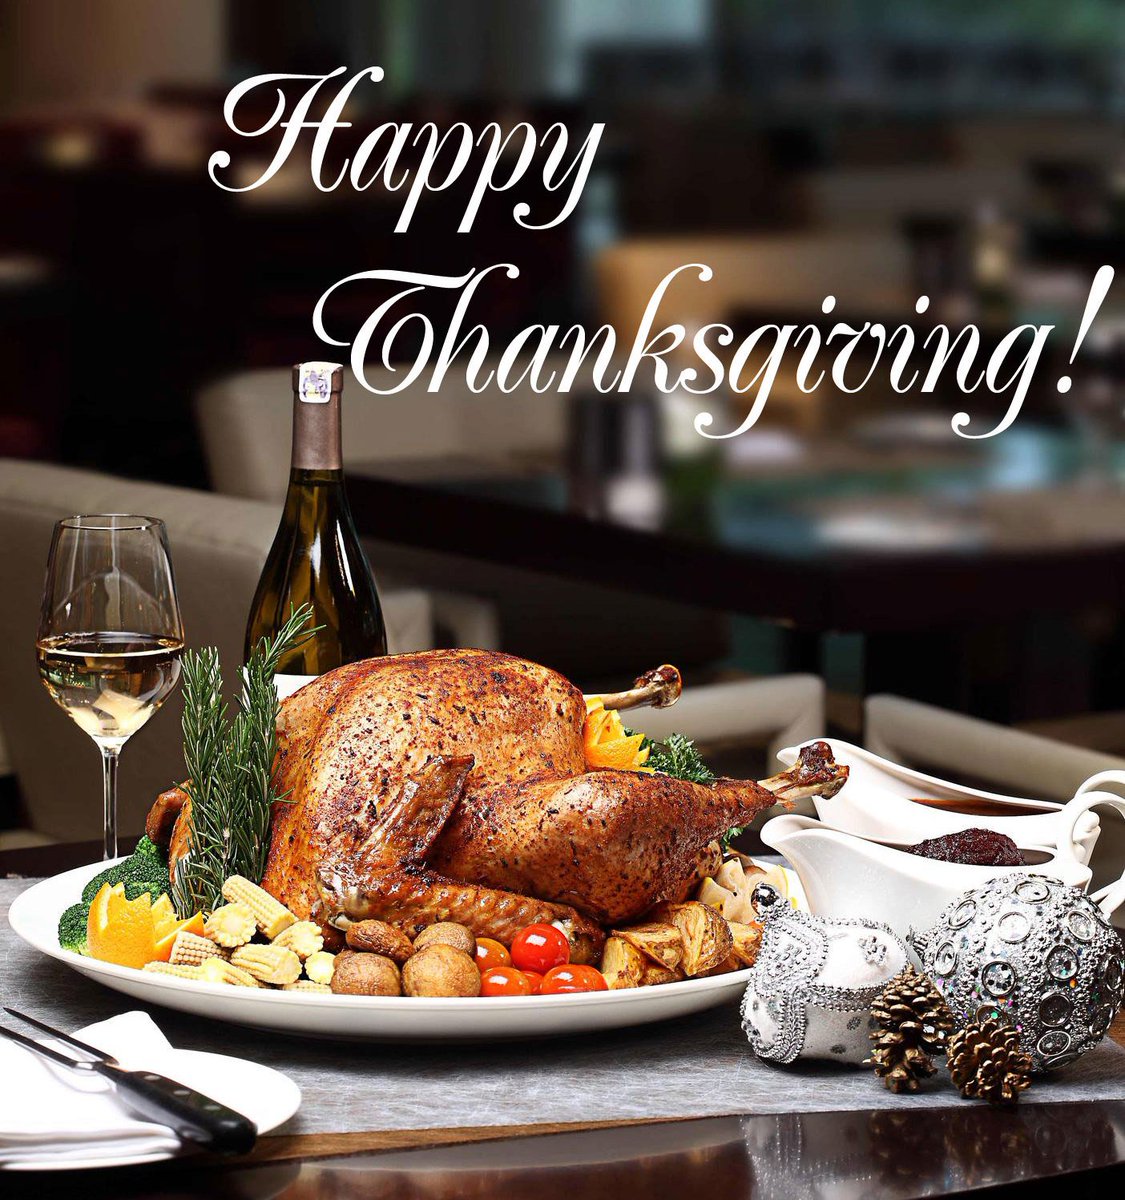 We hope you enjoy an abundant and wonderful time with your family and loved ones! Happy Thanksgiving!